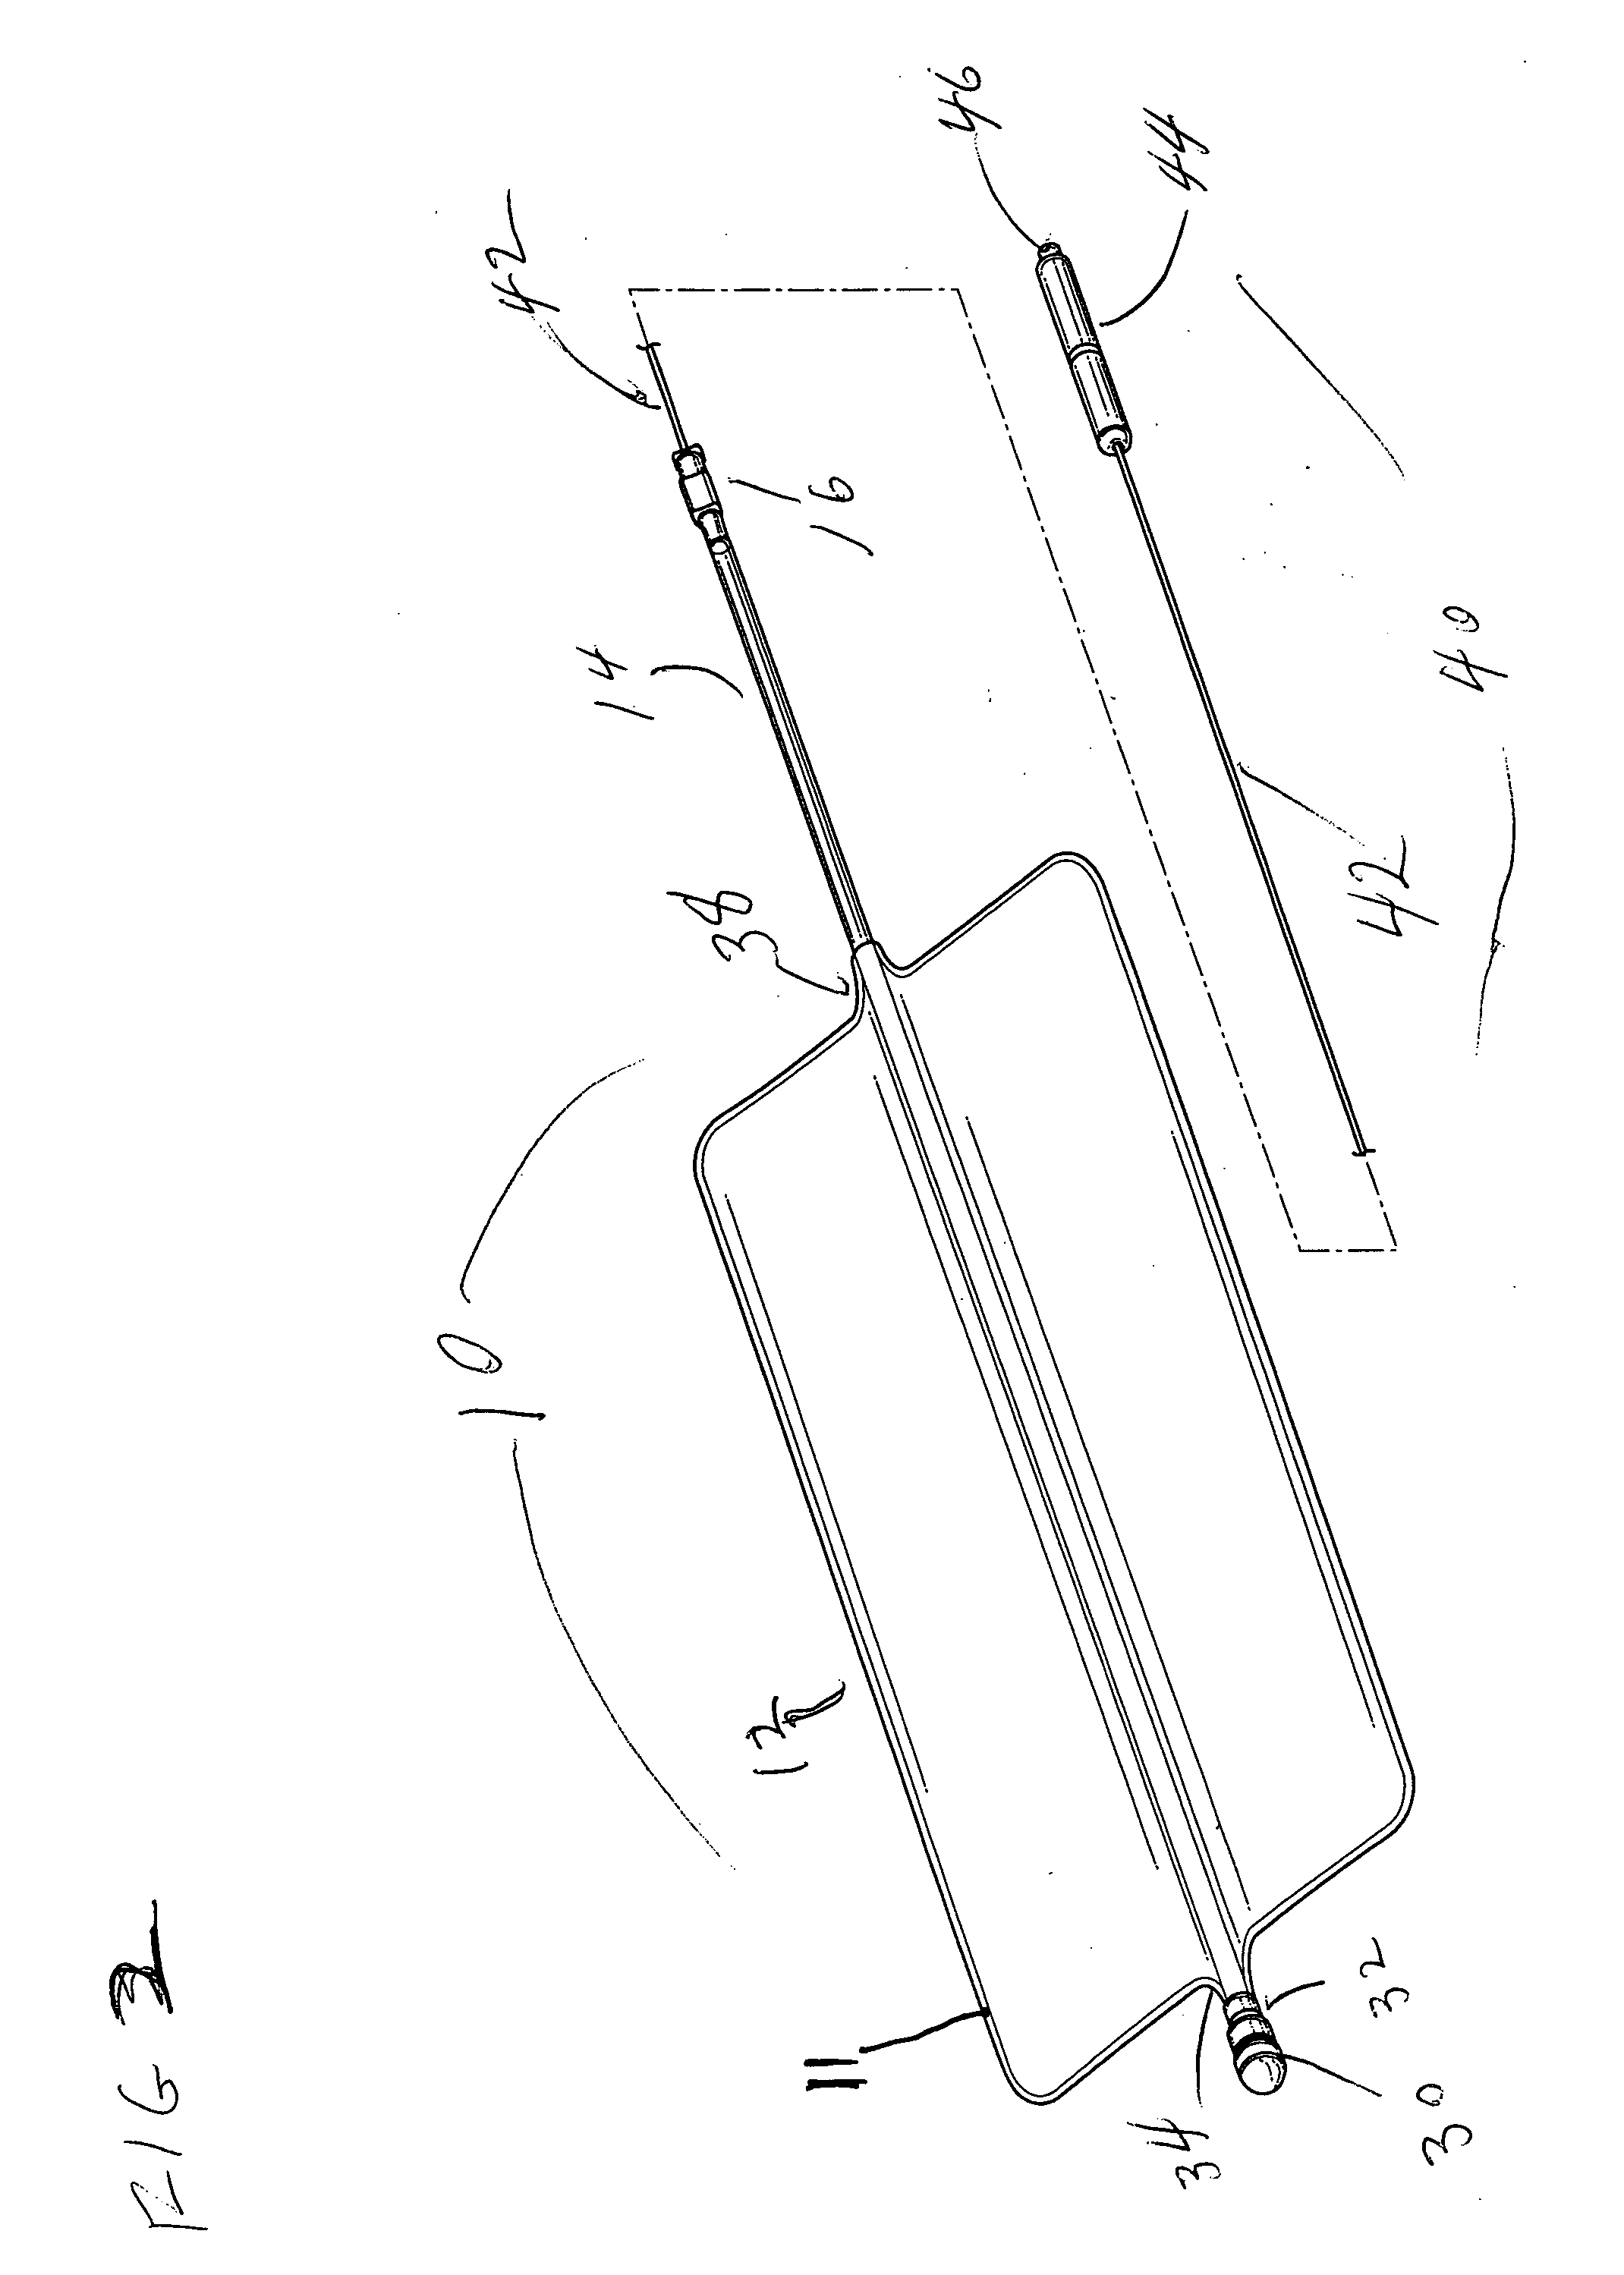 Internal compression tourniquet catheter system and method for wound track navigation and hemorrhage control